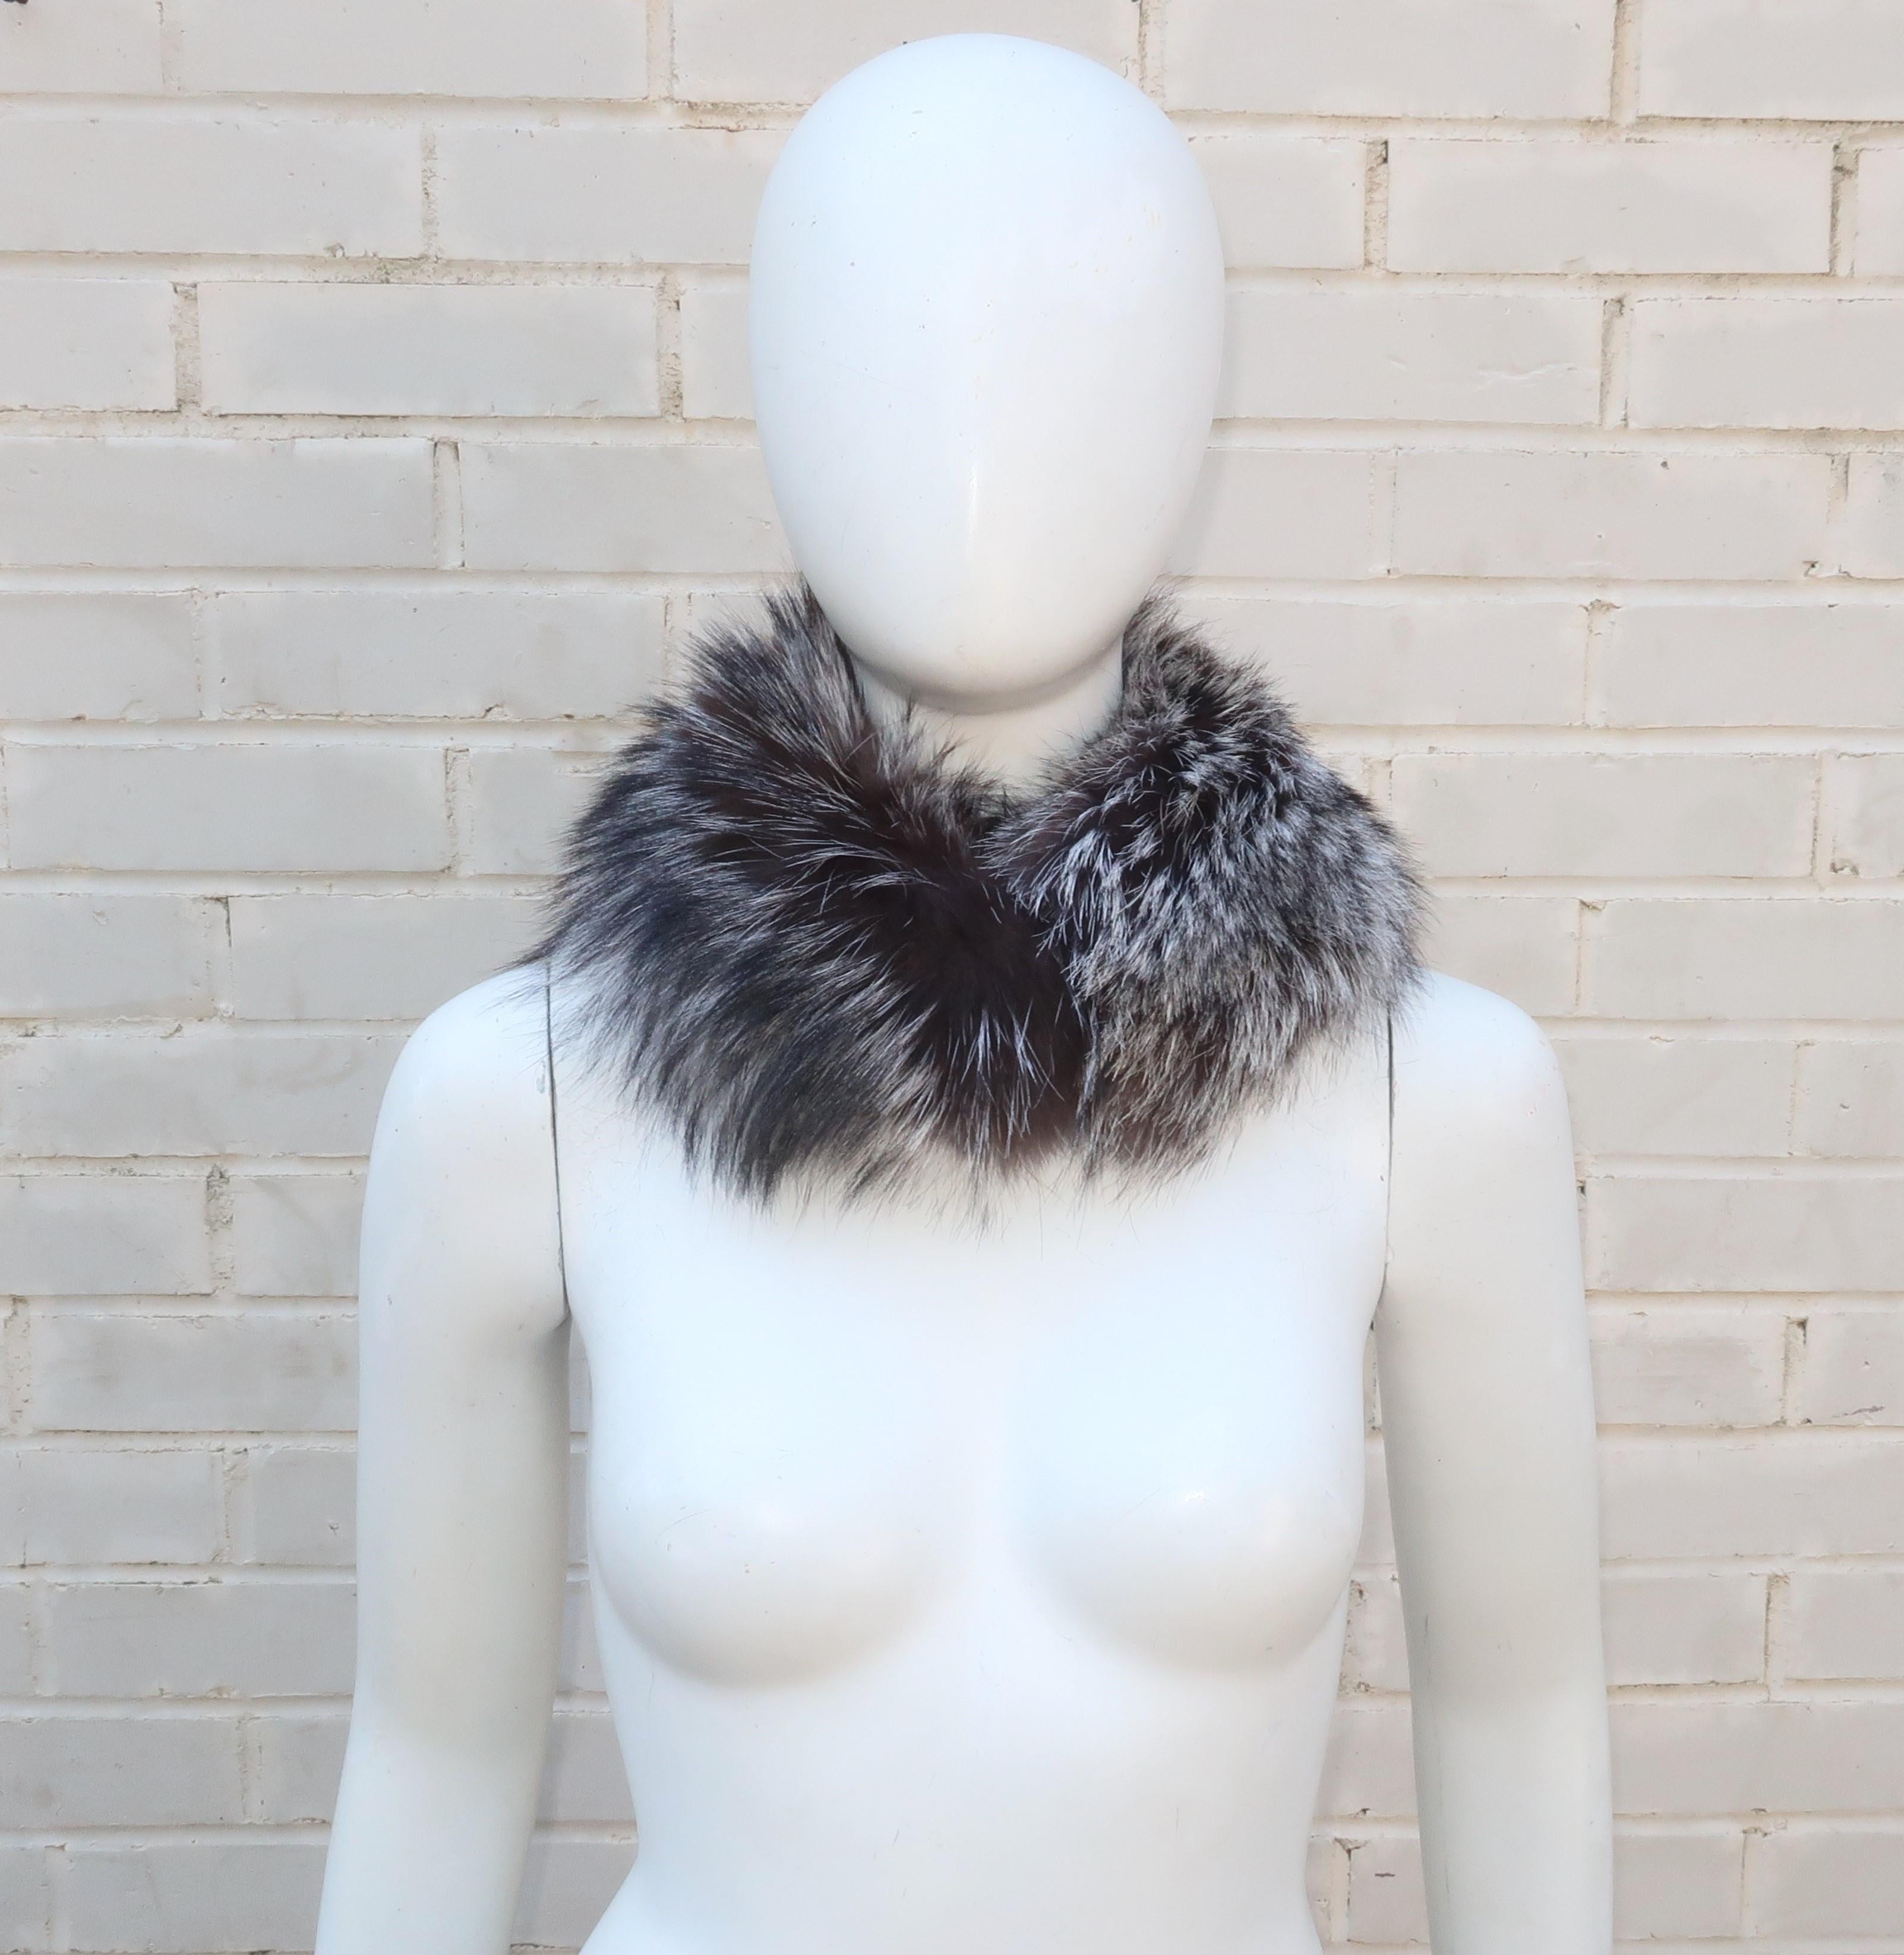 This is the perfect fur accessory for a winter wardrobe and a great way to add warmth and glamour to day or evening looks.  The lush silver tip fox fur incorporates a range of colors including black, silvery white and soft brown which mixes well